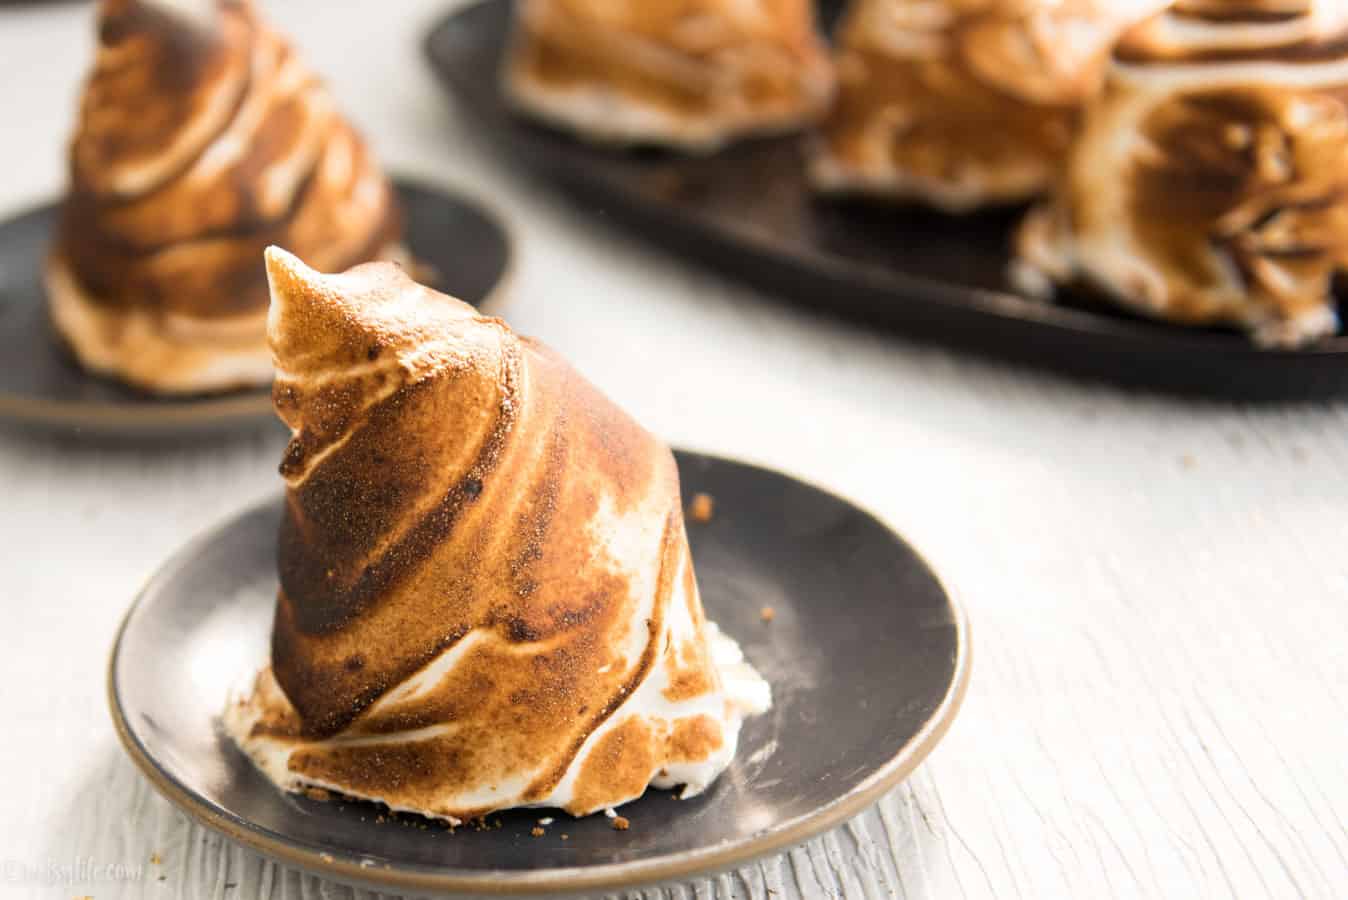 golden brown toasted individual baked alaska on a gray plate